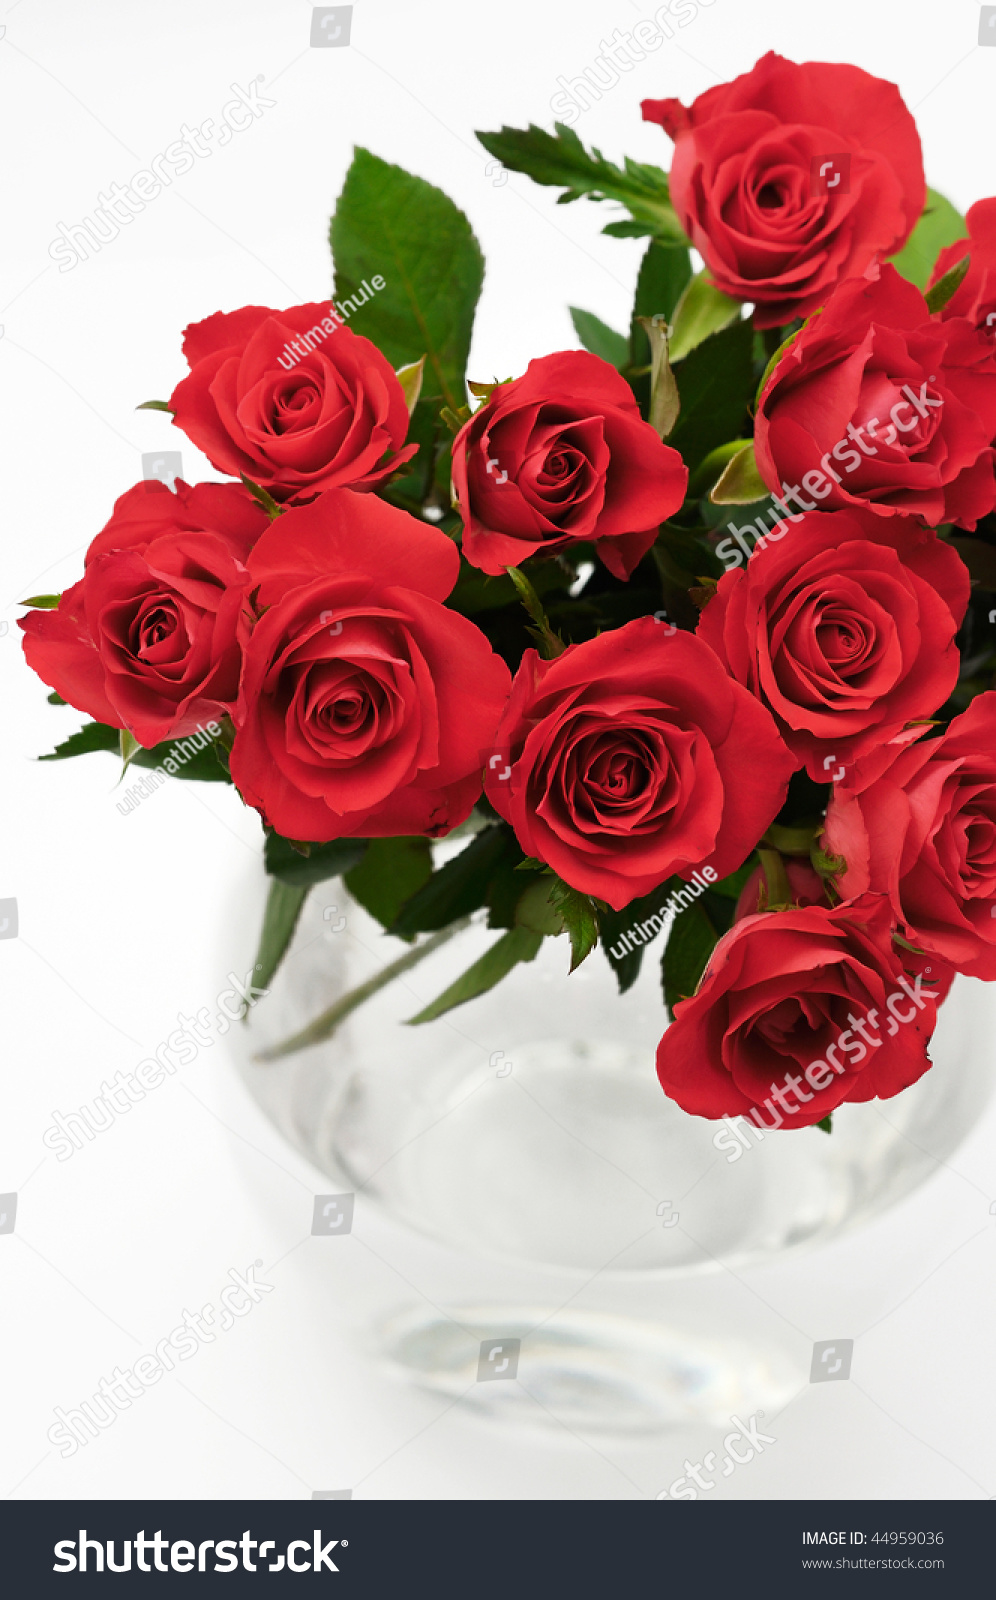 Red Rose Bouquet In Vase Stock Photo 44959036 : Shutterstock